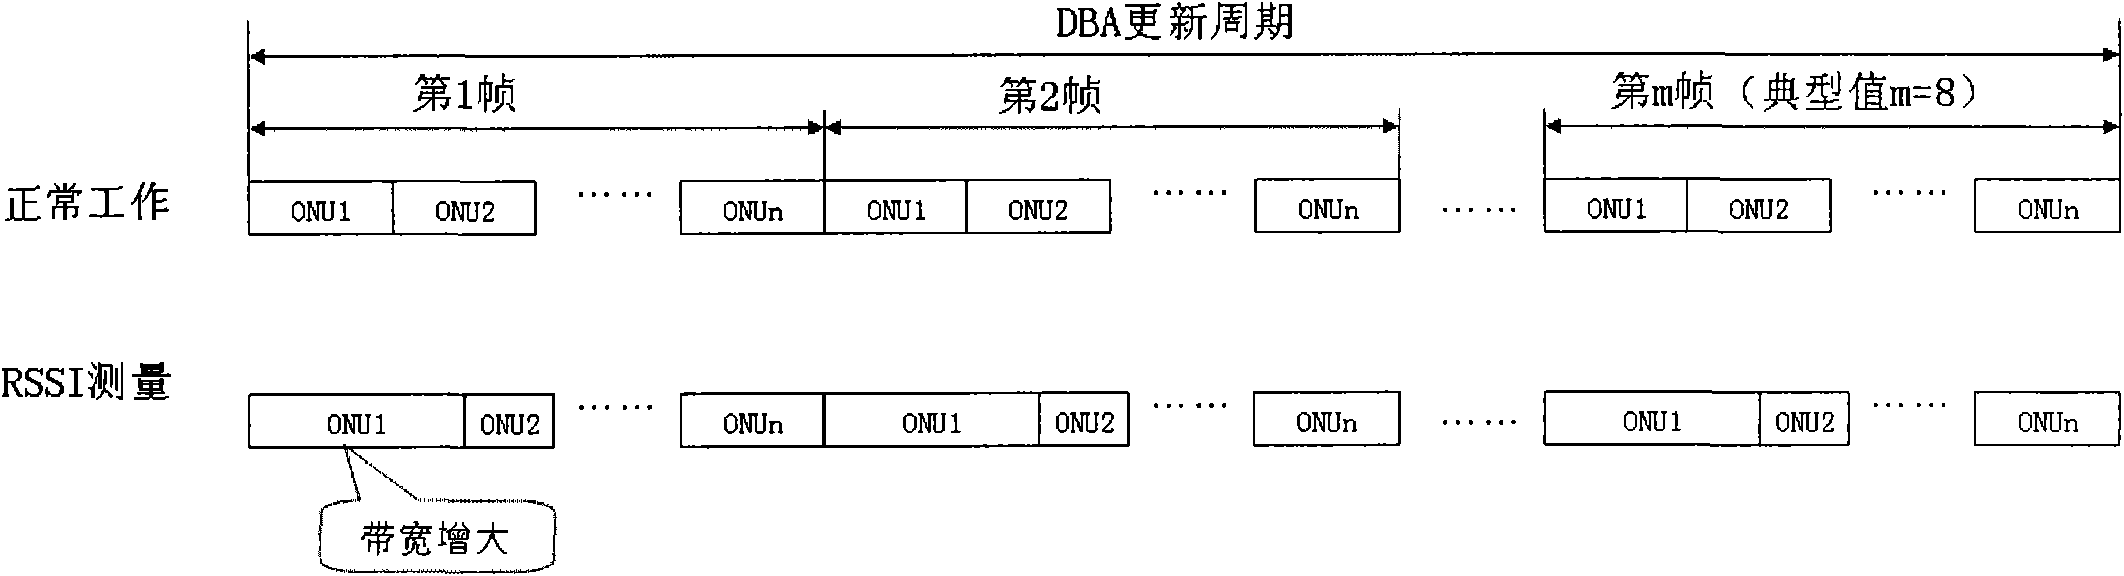 Method for measuring optical power, optical line terminal and optical network unit